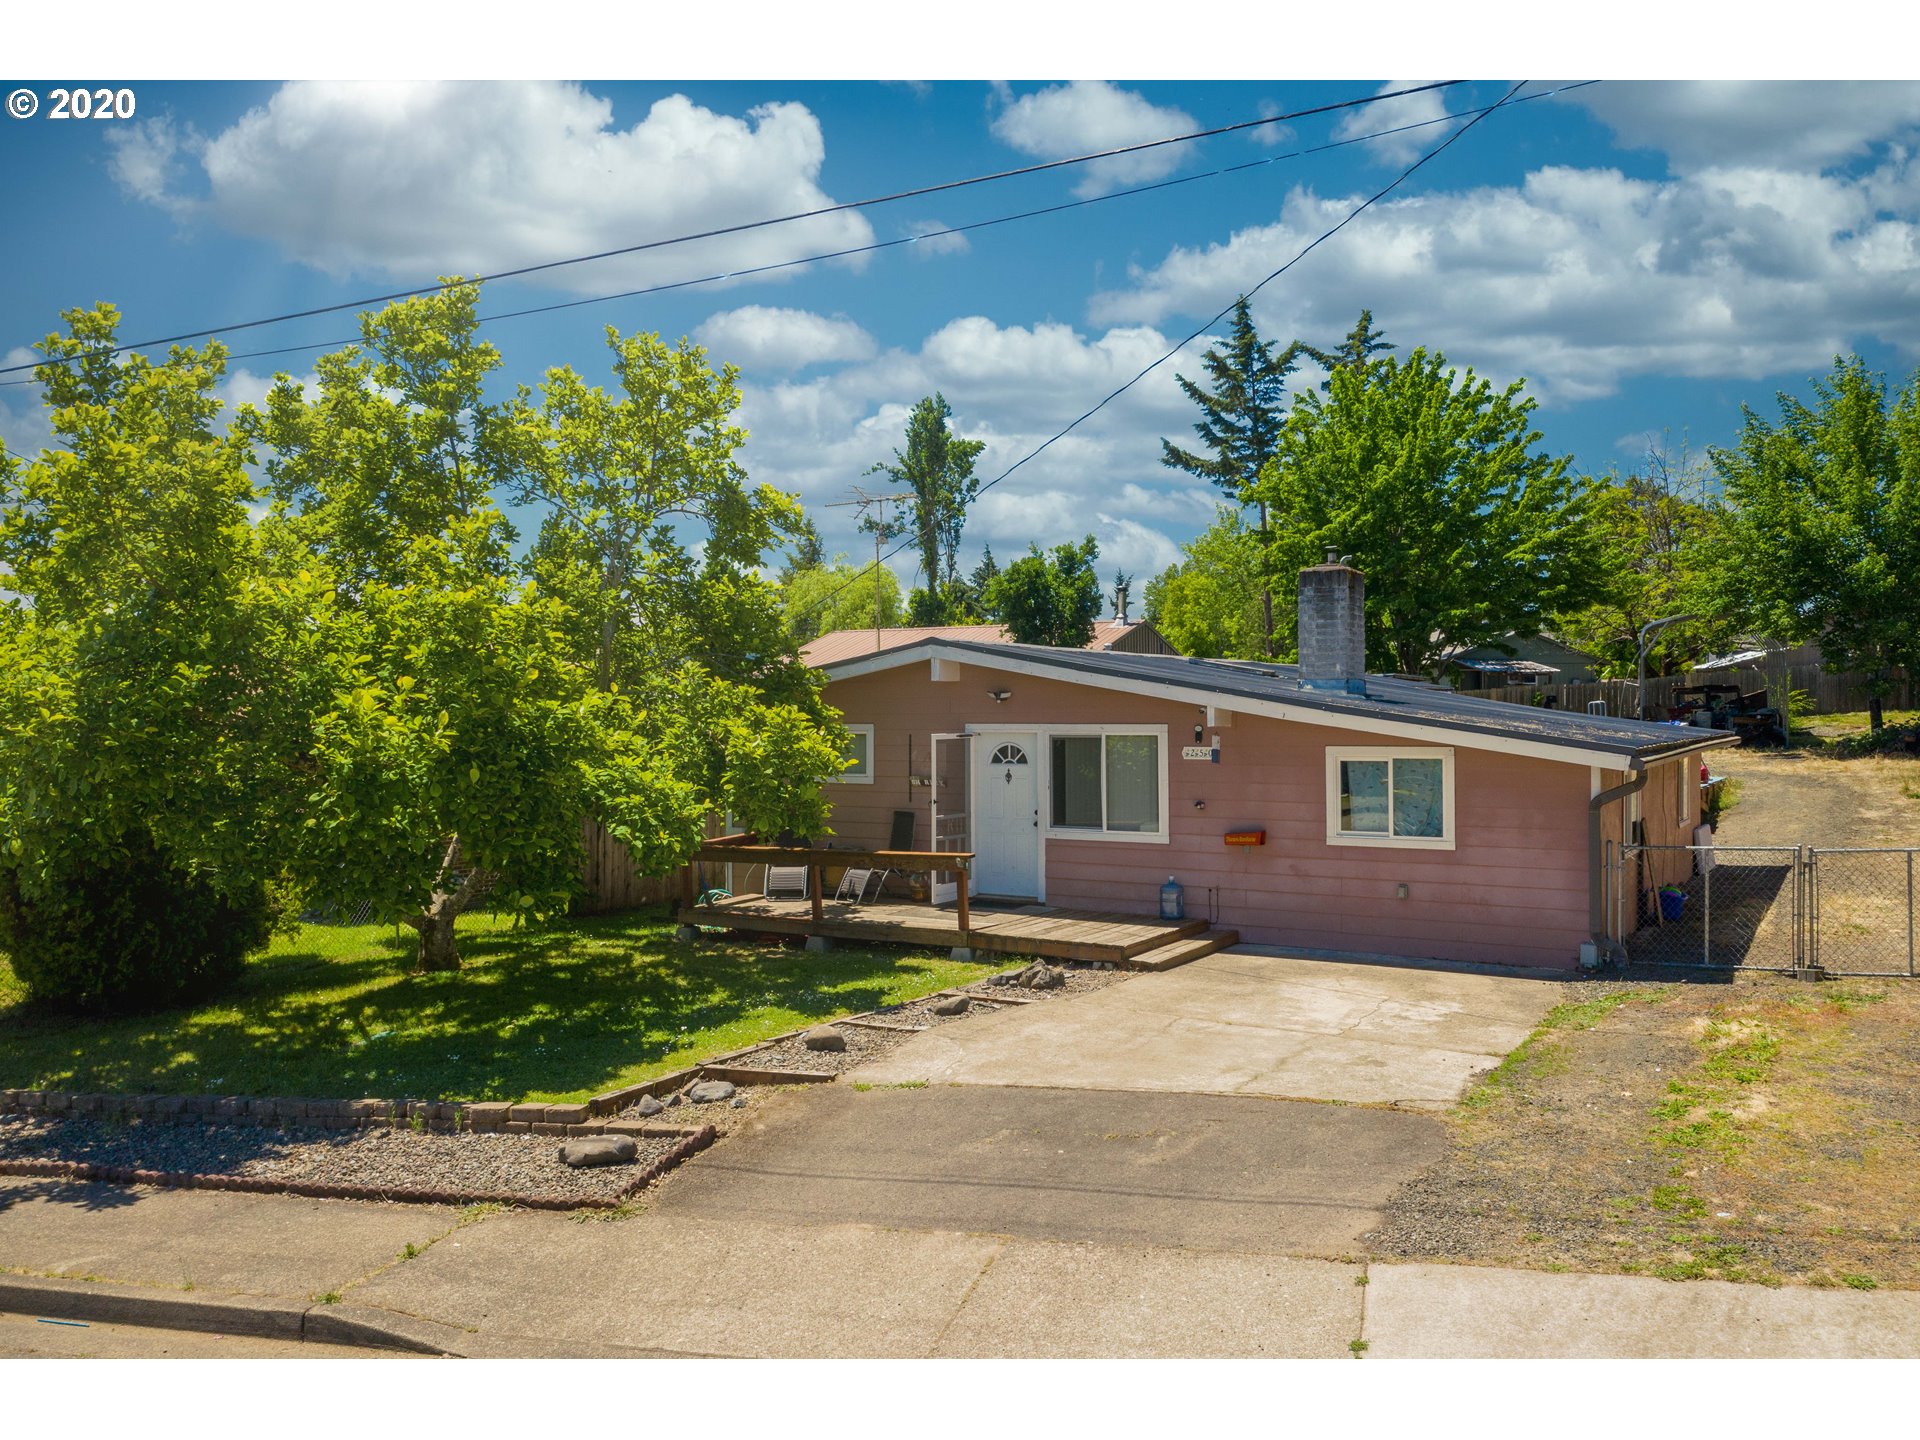 250 NW PLUM AVE (1 of 25)